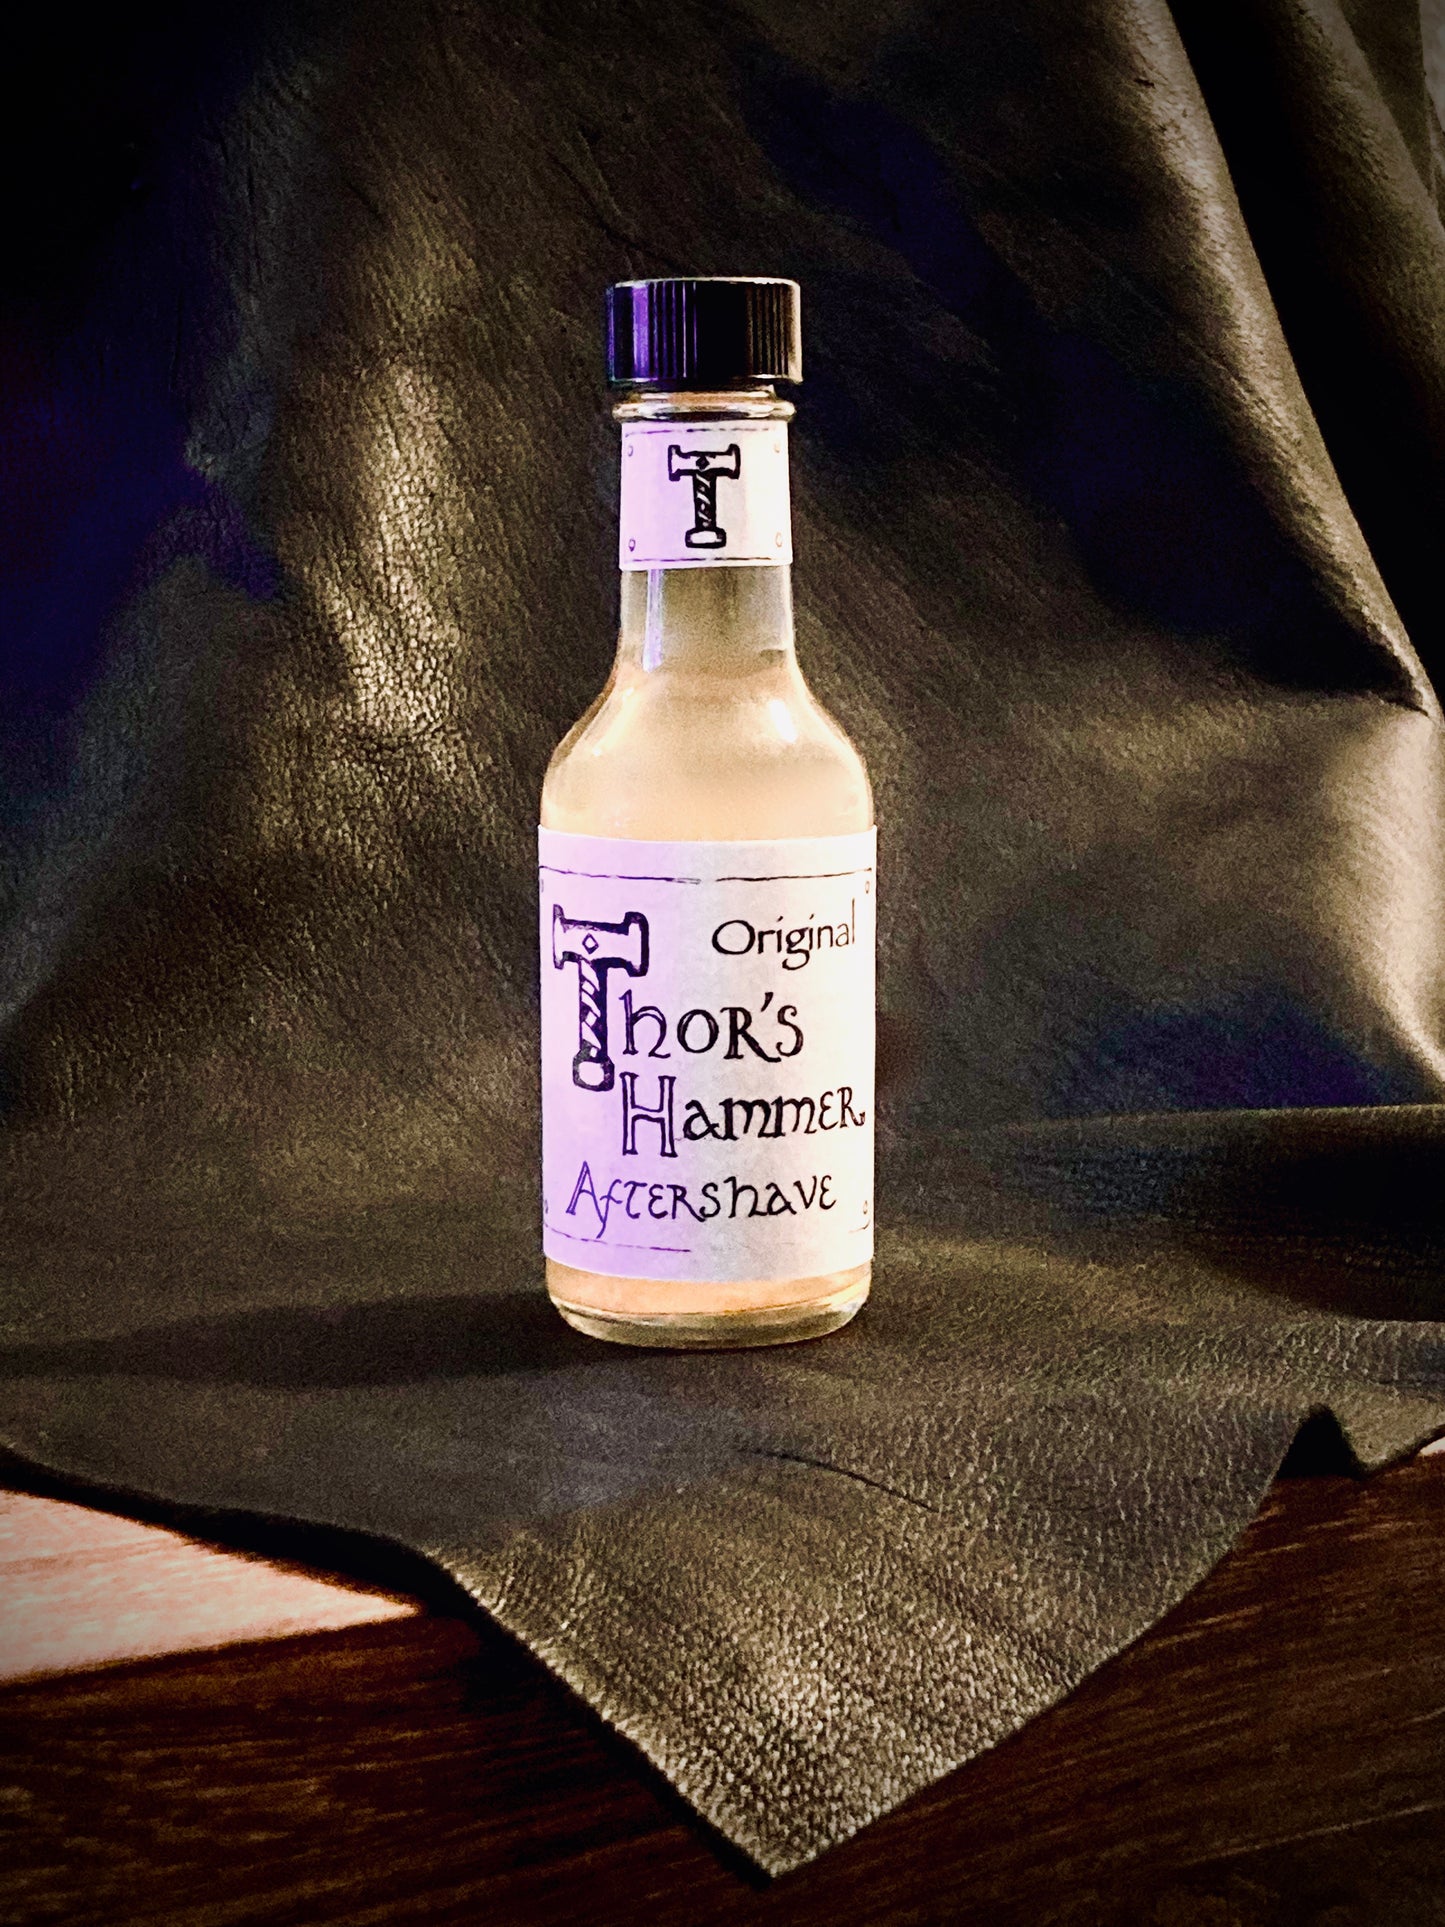 Thor's Hammer Original Aftershave | Viking Axe Aftershave | Fresh, Smooth, Spicy, Musky, Resinous